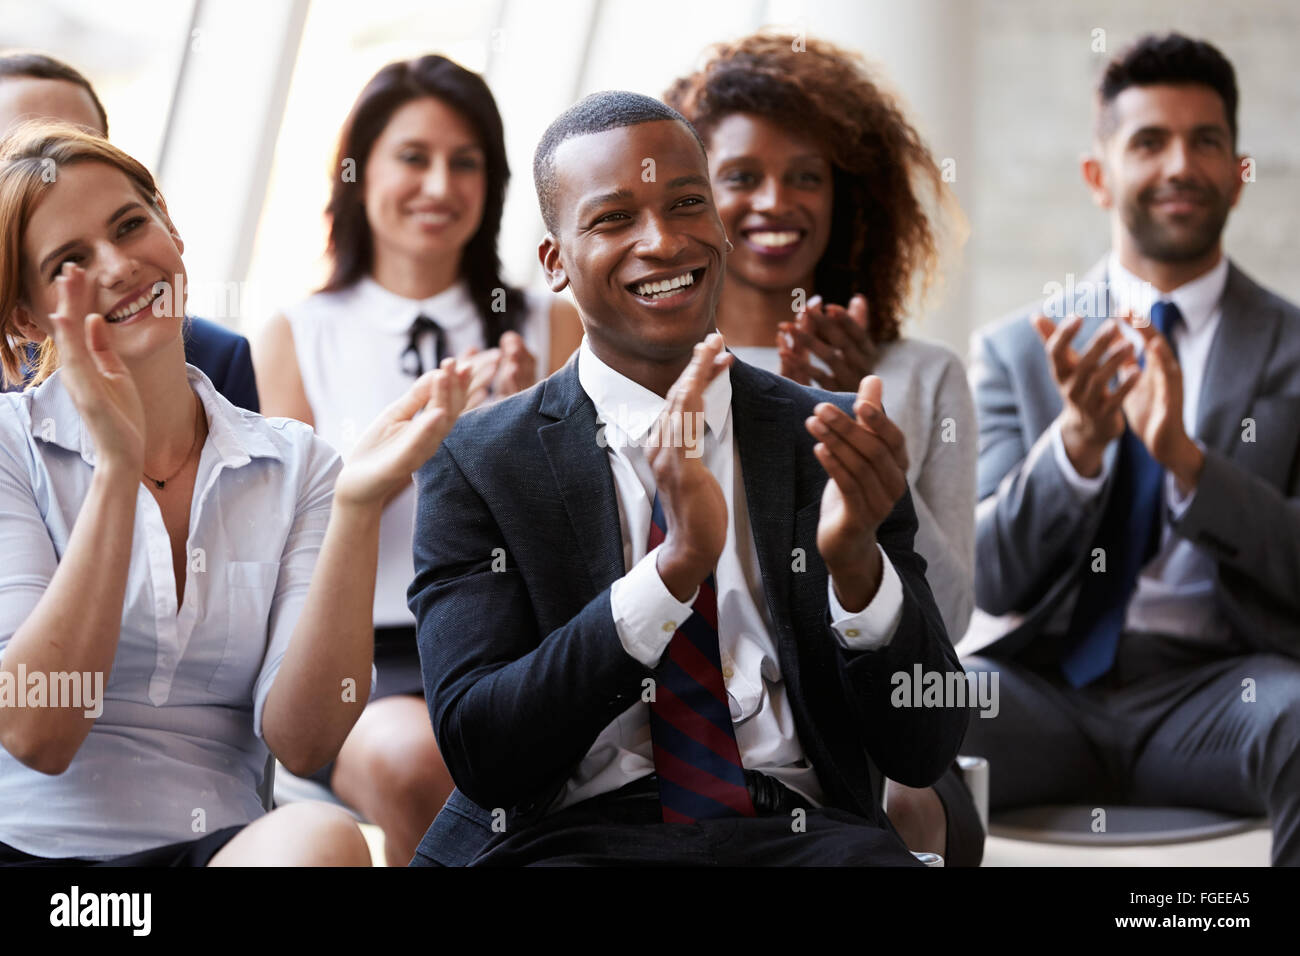 Audience Applauding Speaker At Business Conference Stock Photo